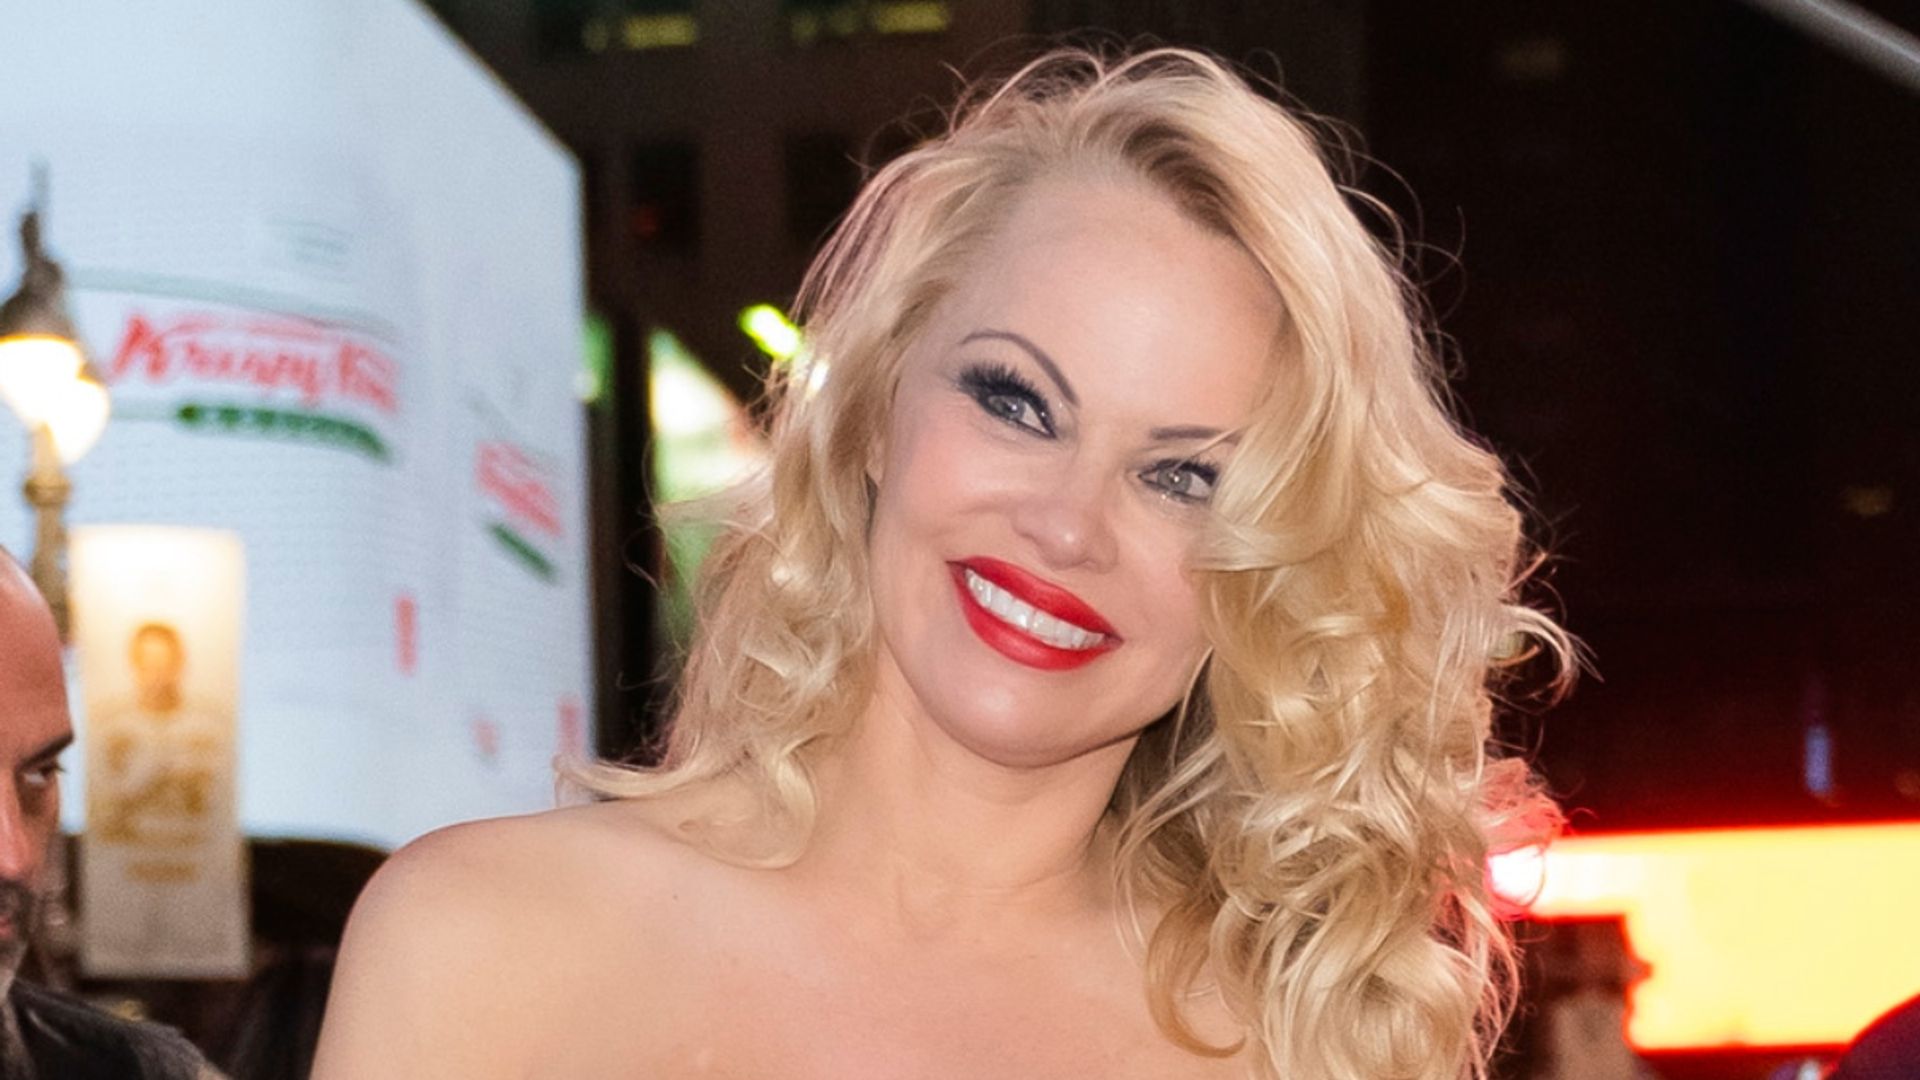 Pamela Anderson struts her stuff in breathtaking sleeveless black gown for night on the town